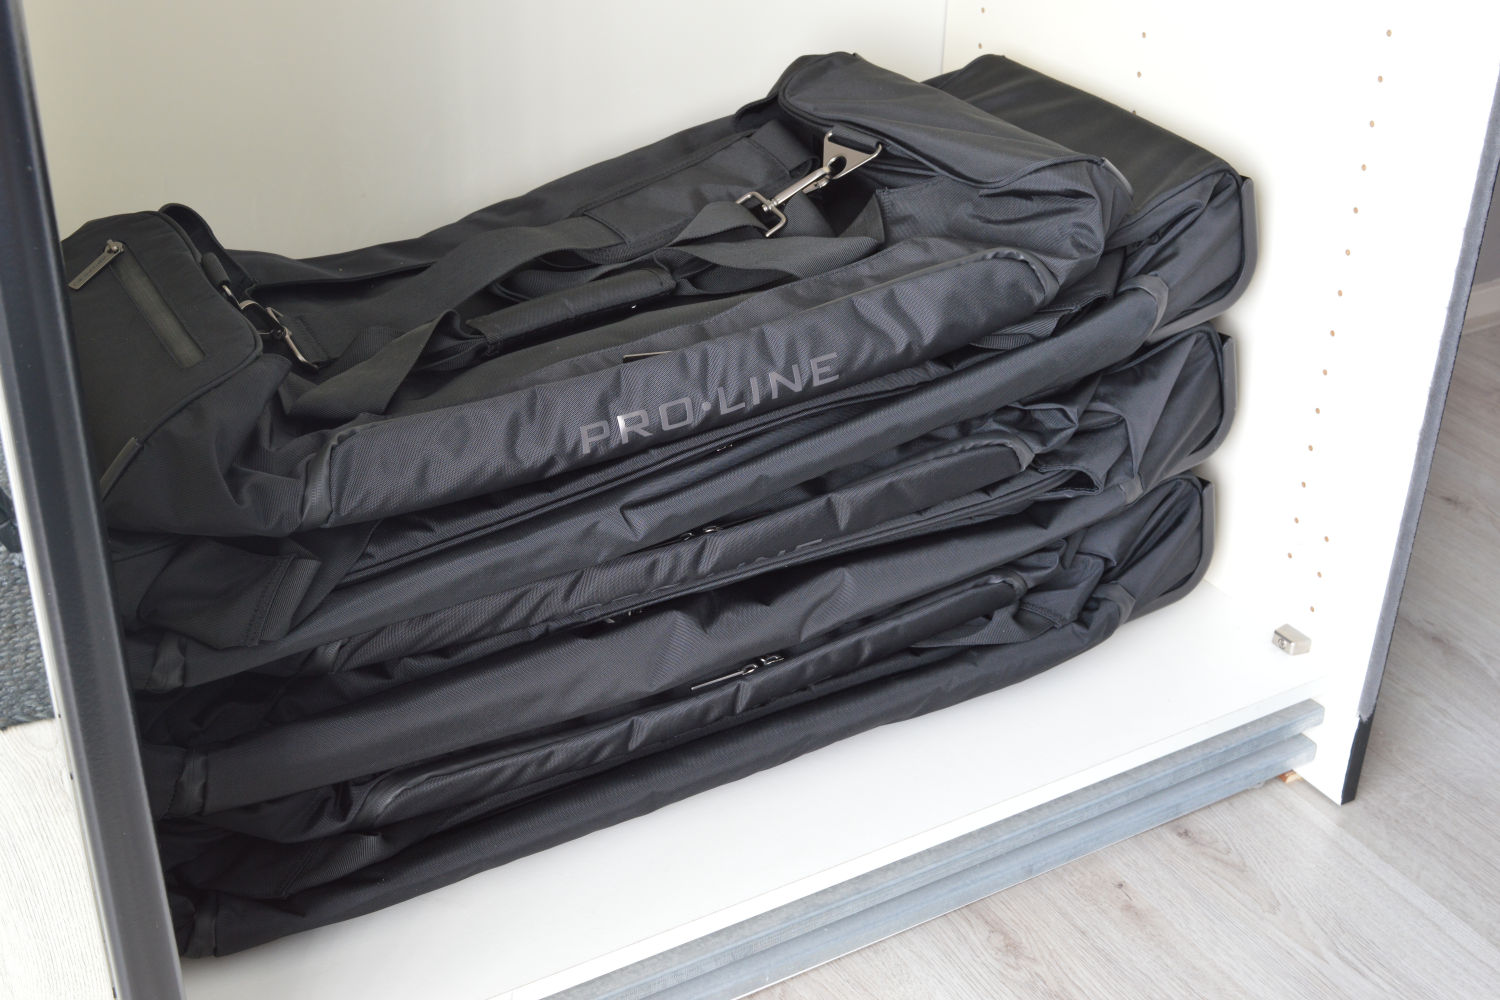 Car-Bags.com travel bag sets are compactly storable